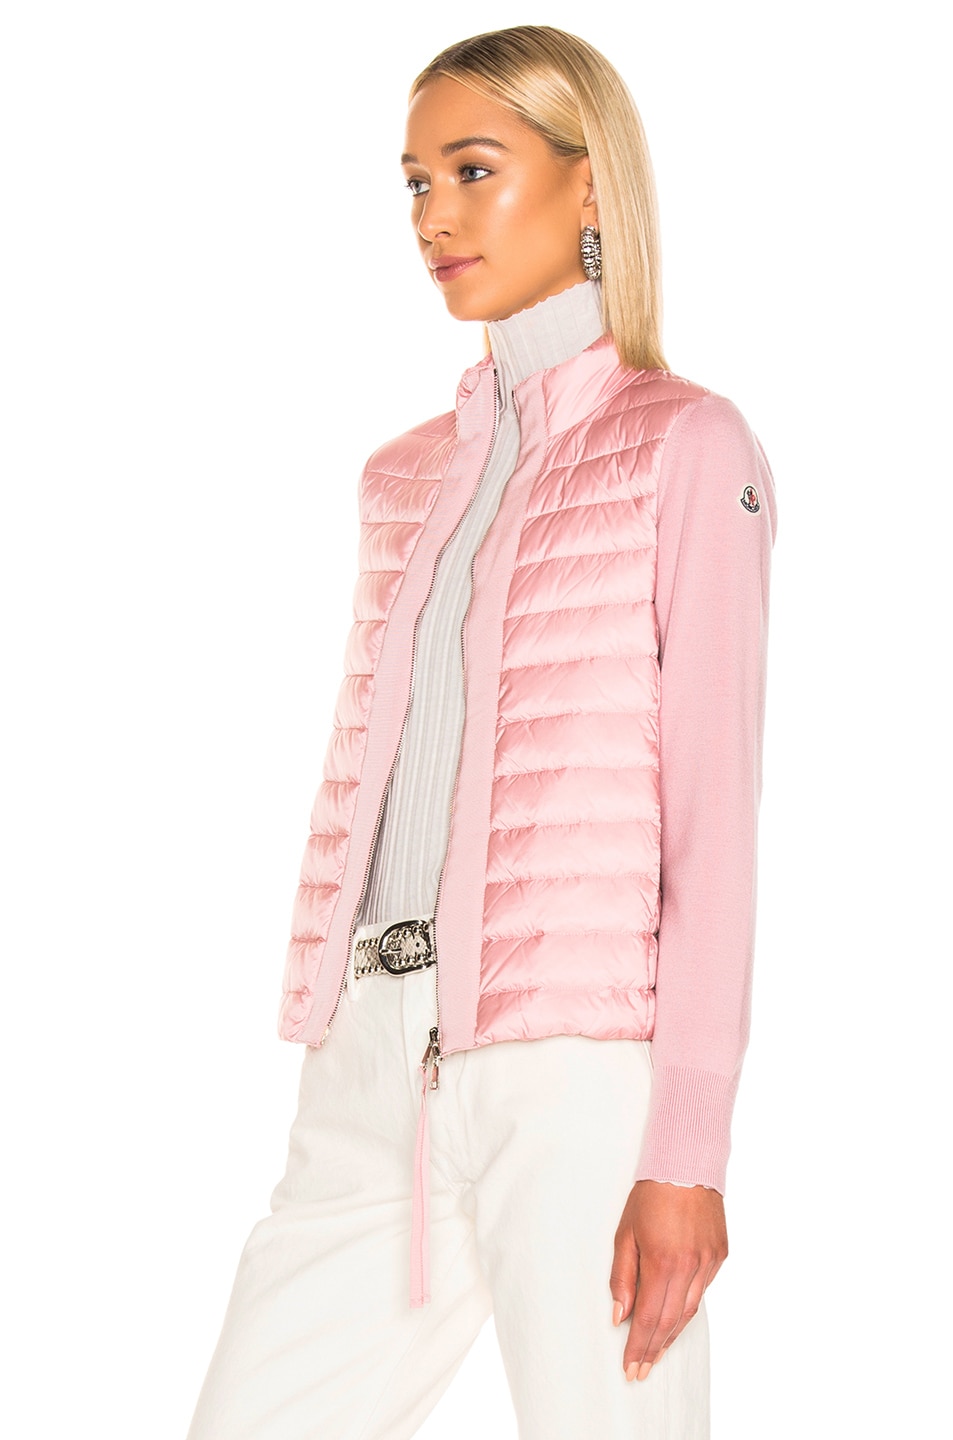 Moncler Maglia Tricot Cardigan Jacket in Pink | FWRD